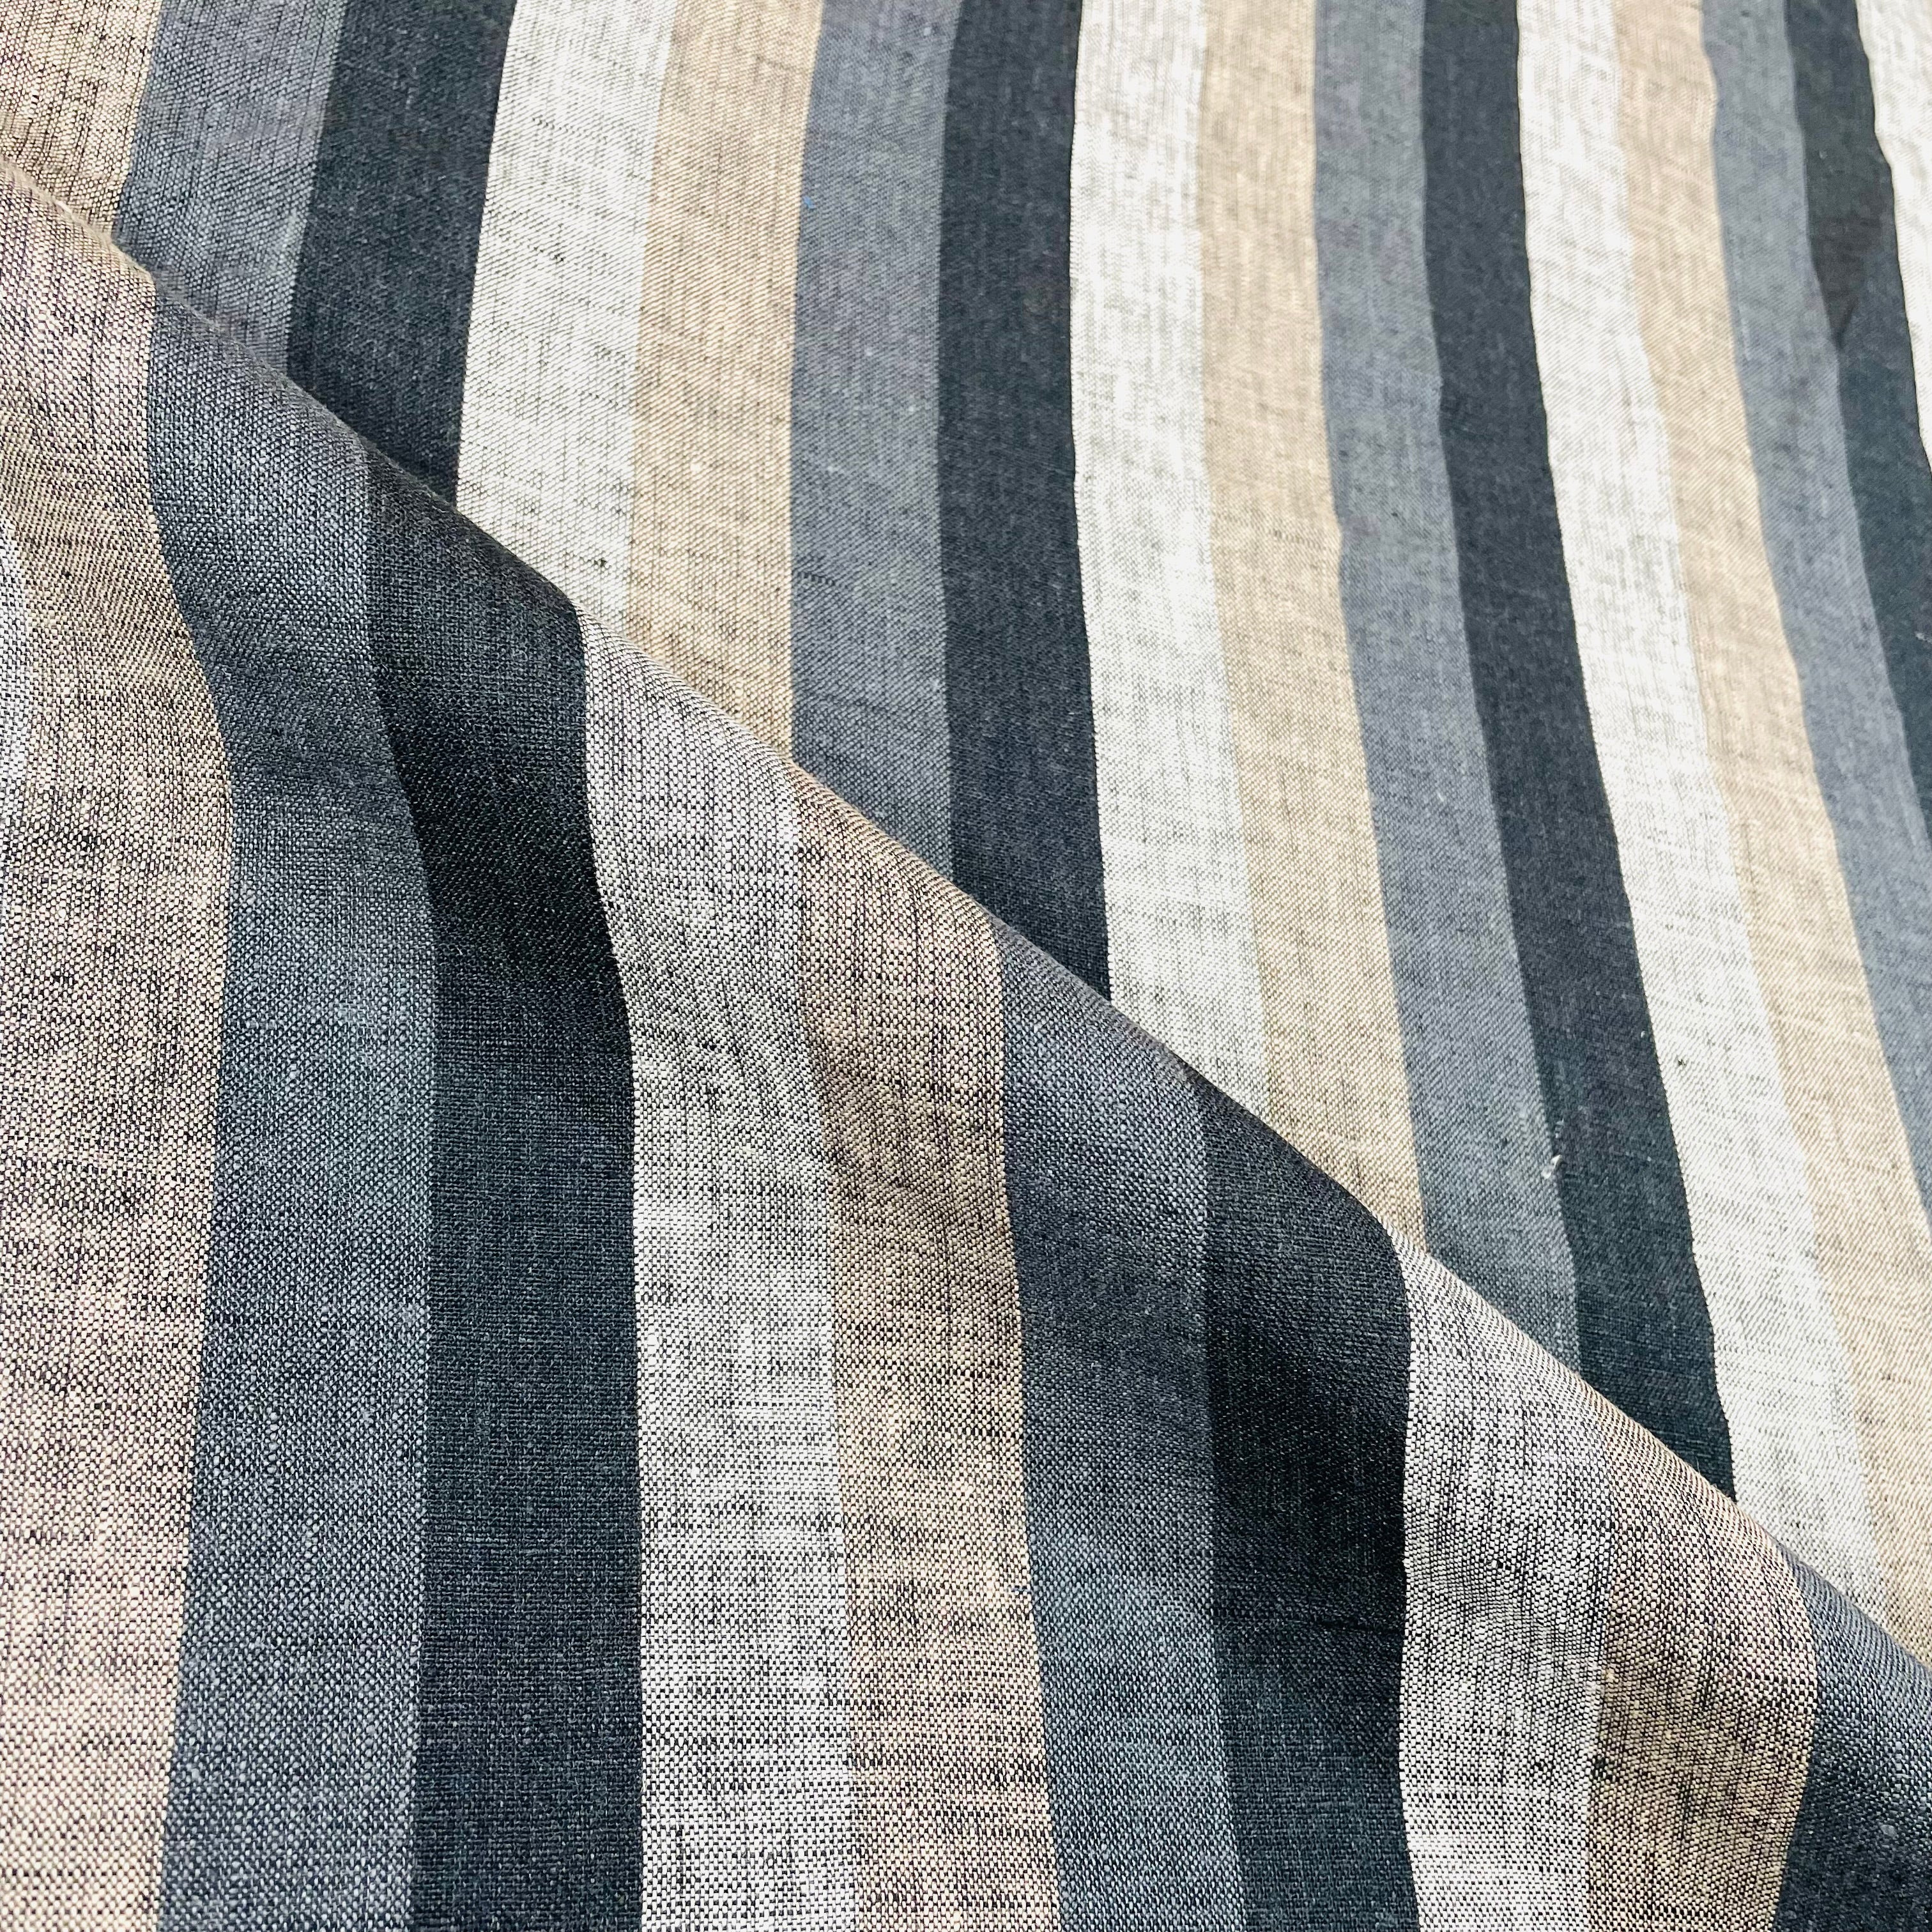 Dark Striped Multi Colors 100% Natural Linen Flat Relaxed Casual Roman Shade